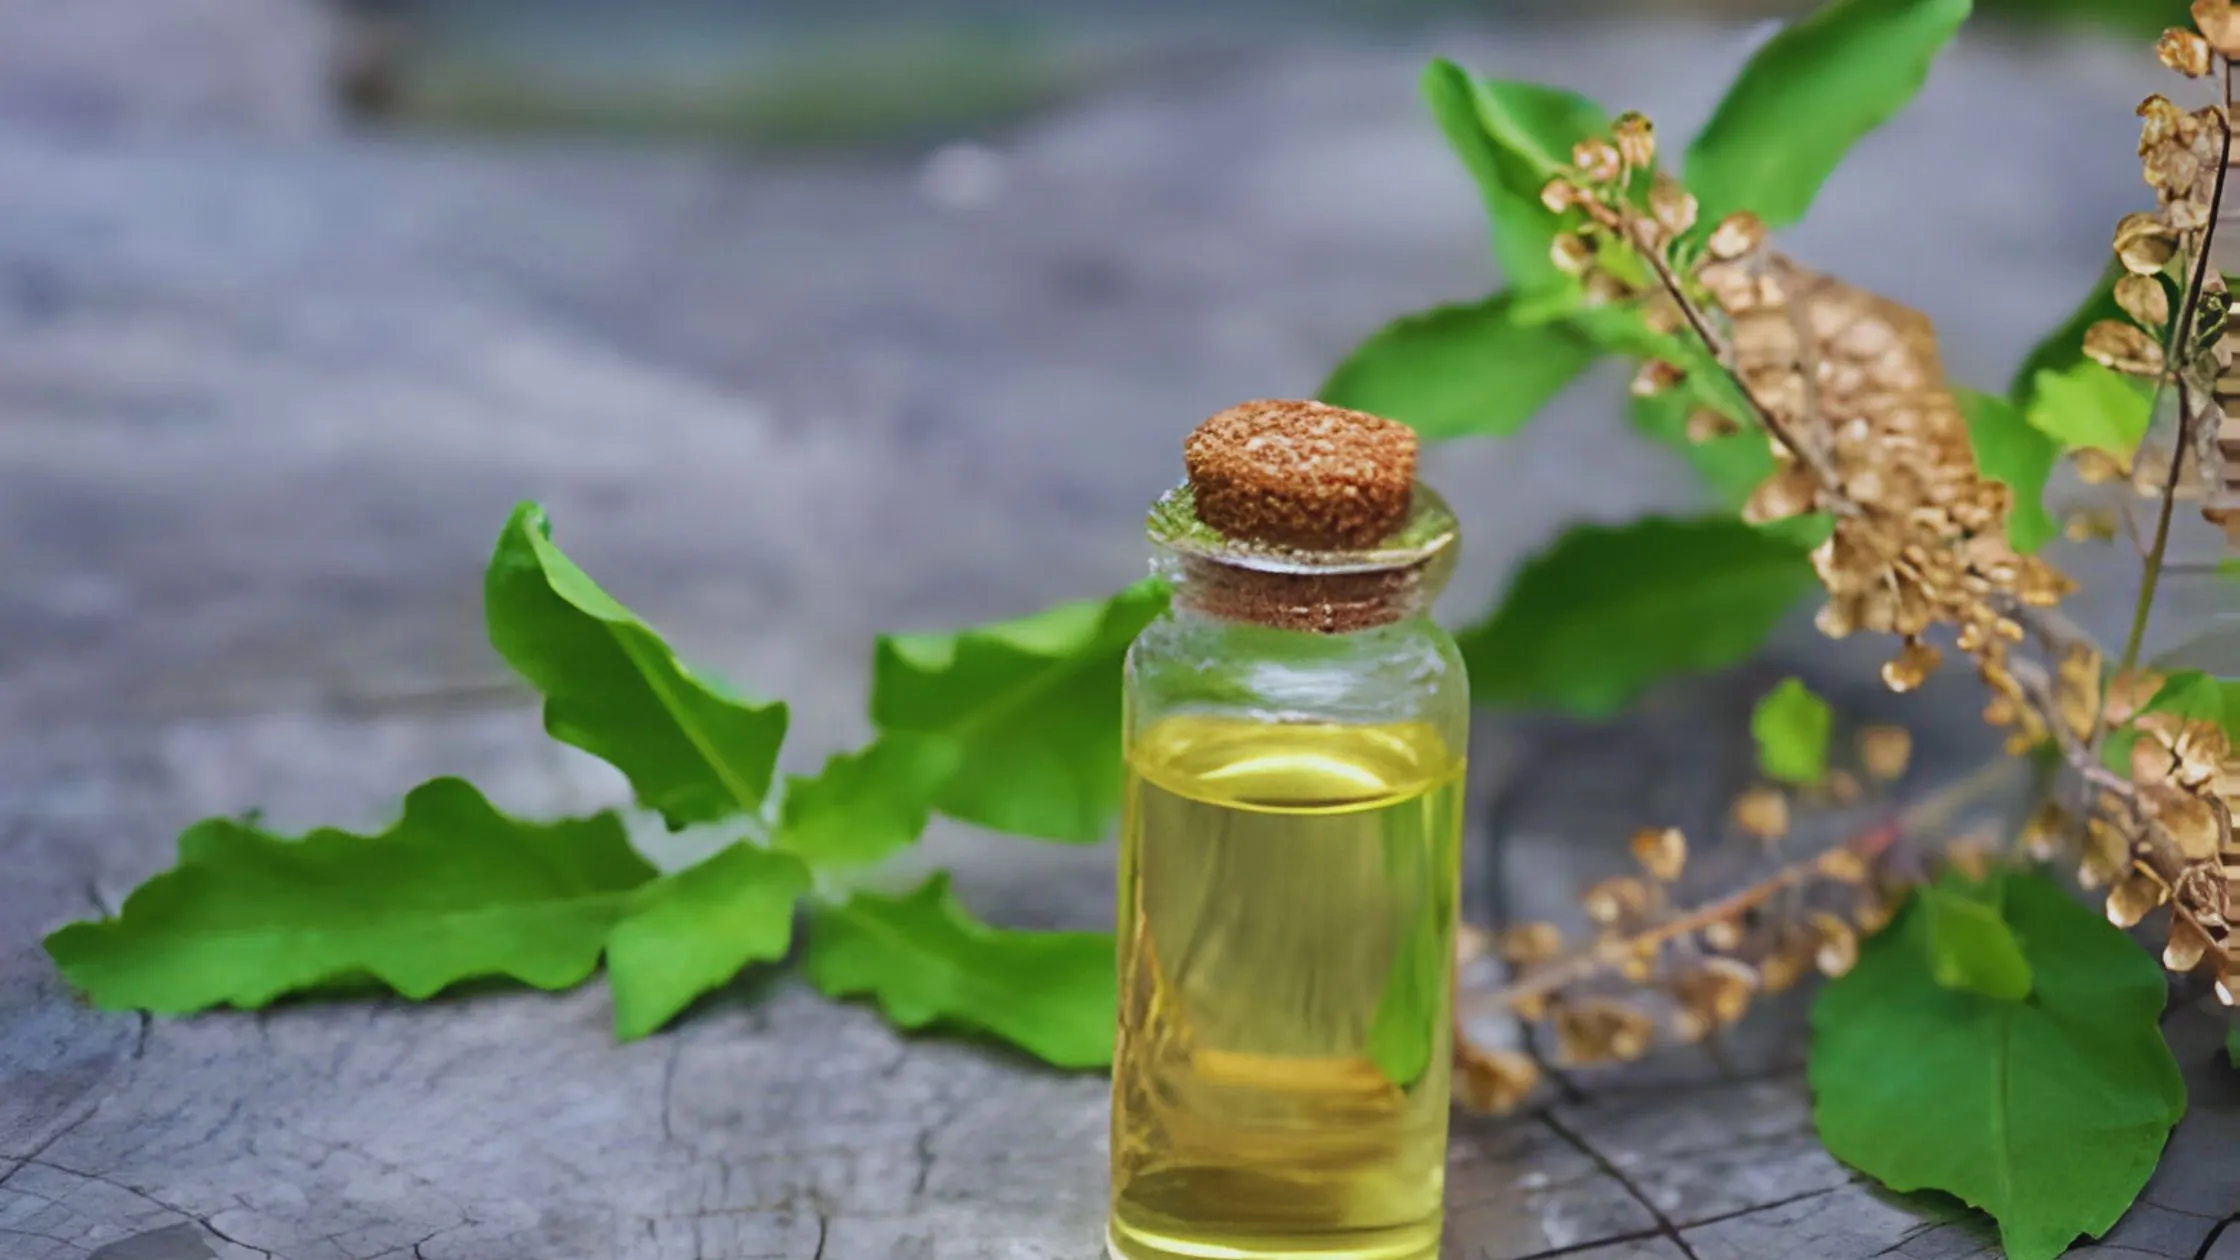 How to Make Oregano Oil With Ease